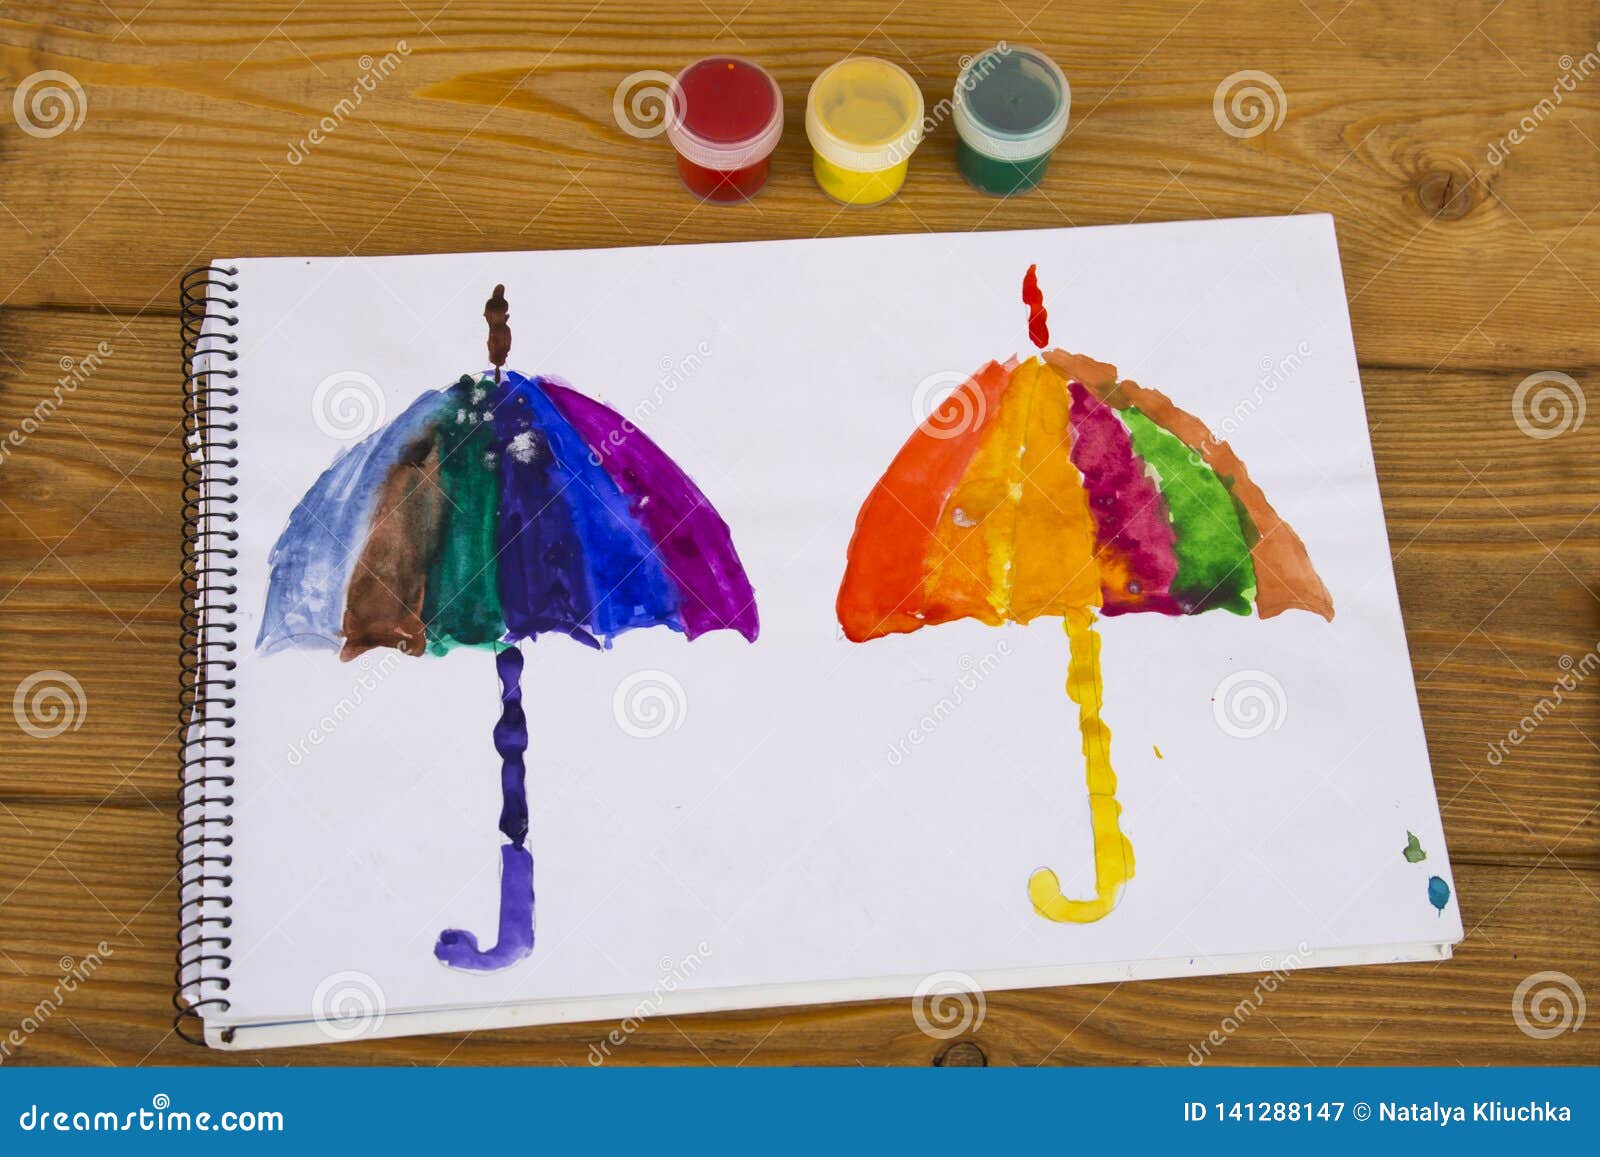 5 easy watercolor painting lessons for children - NurtureStore